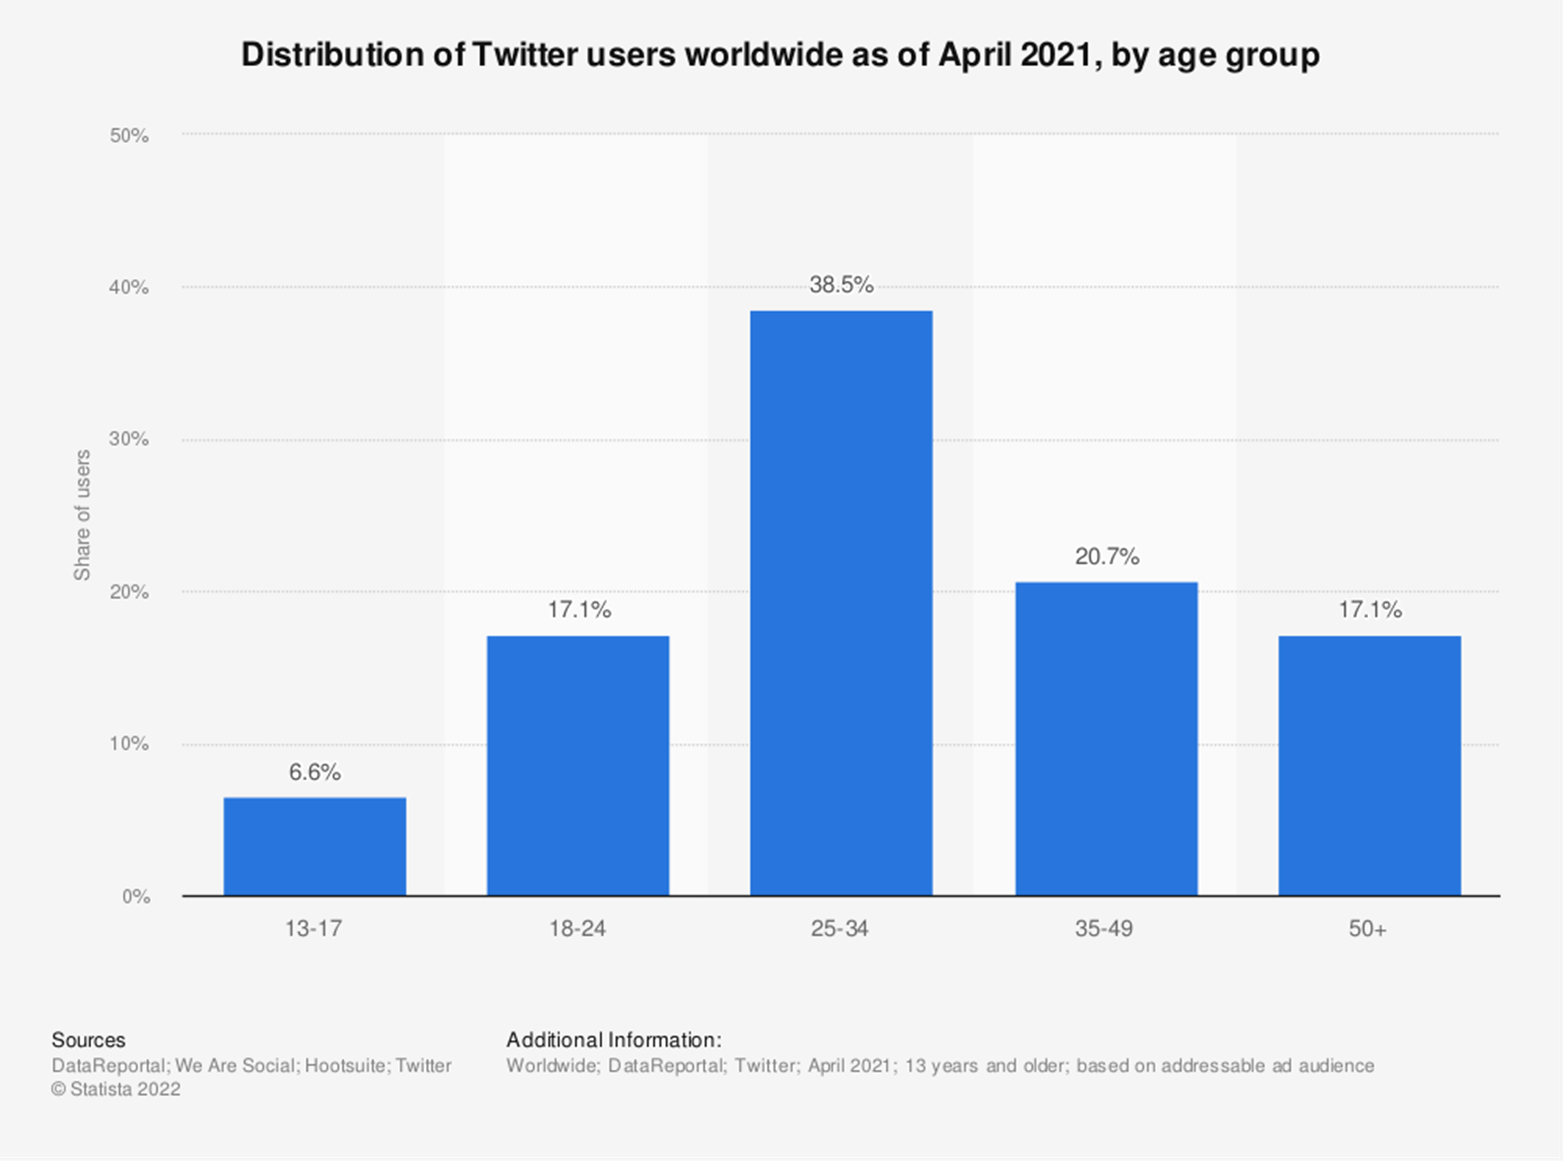 Statista's statistics on Twitter usage by age.